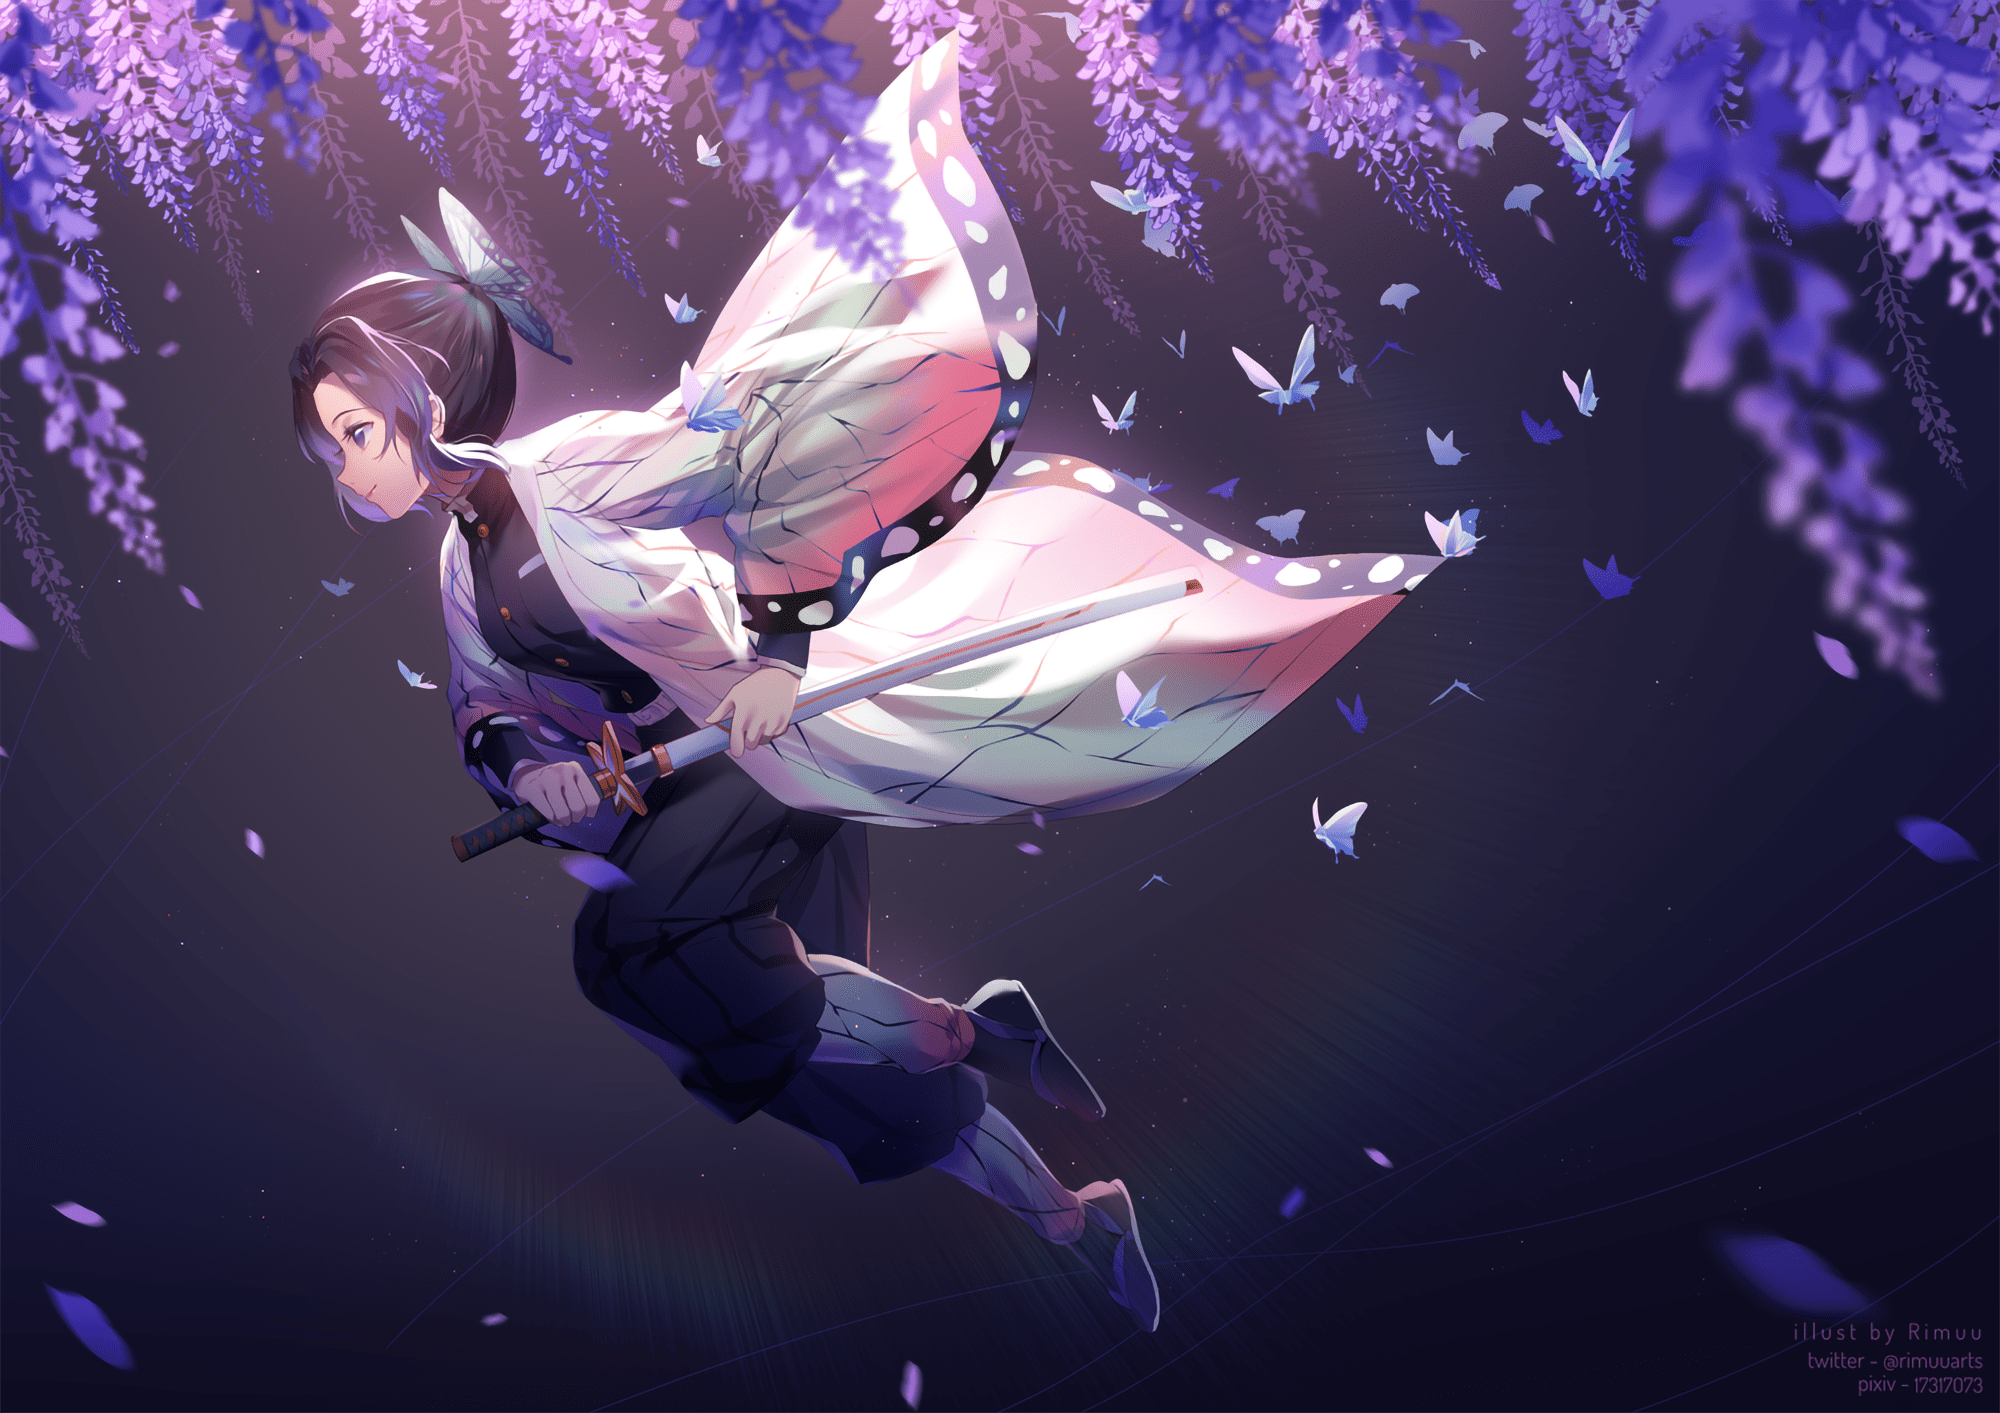 A girl with a sword and a flowing white and purple dress flies through the air, surrounded by purple flowers and butterflies. - Demon Slayer